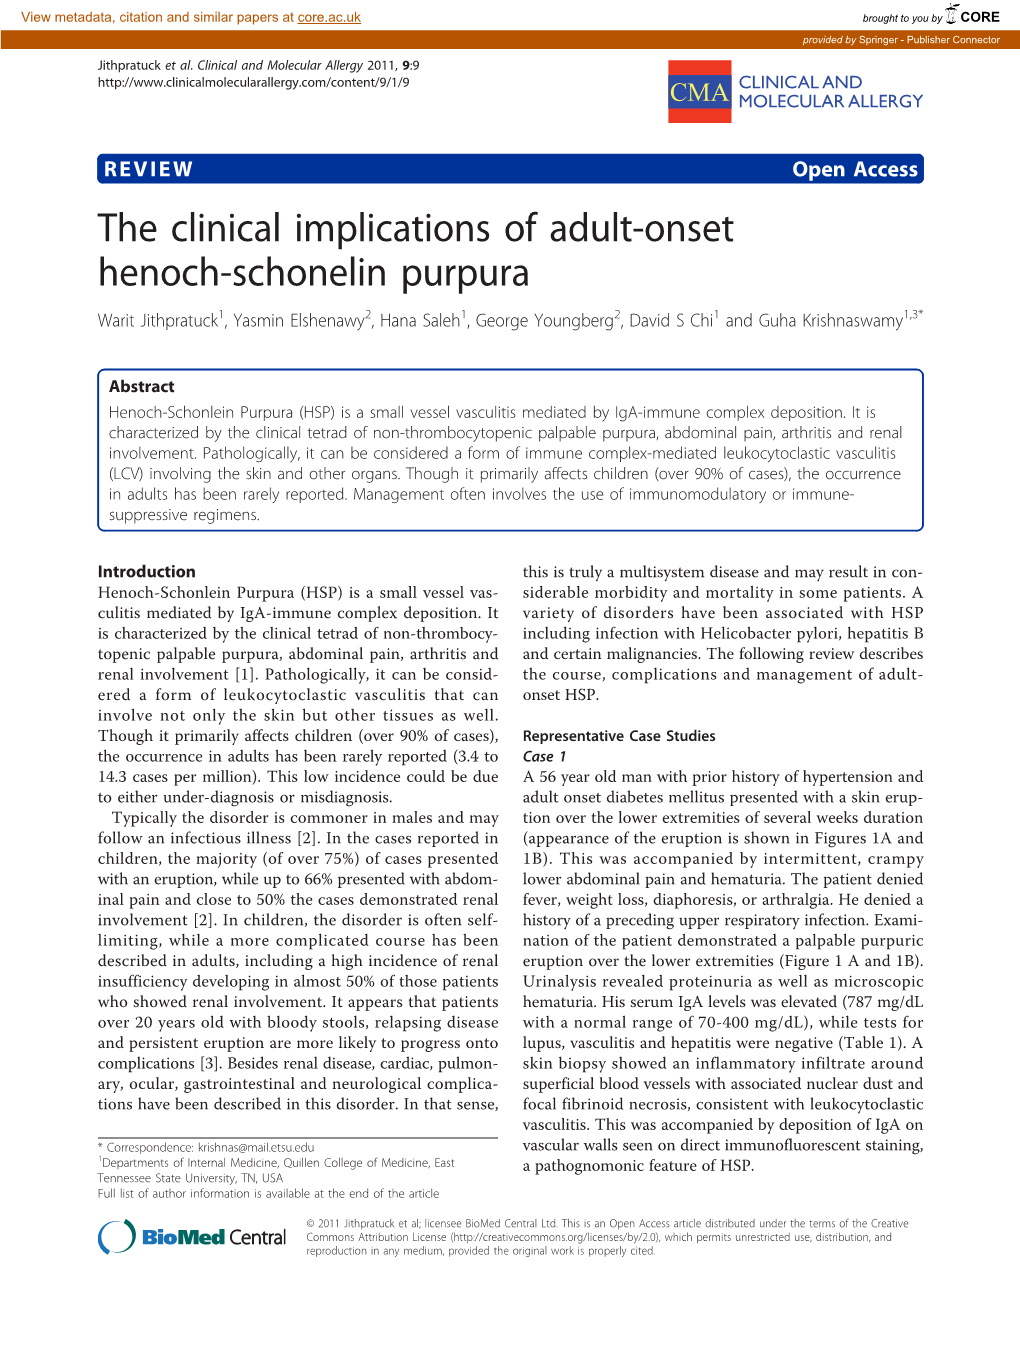 The Clinical Implications of Adult-Onset Henoch-Schonelin